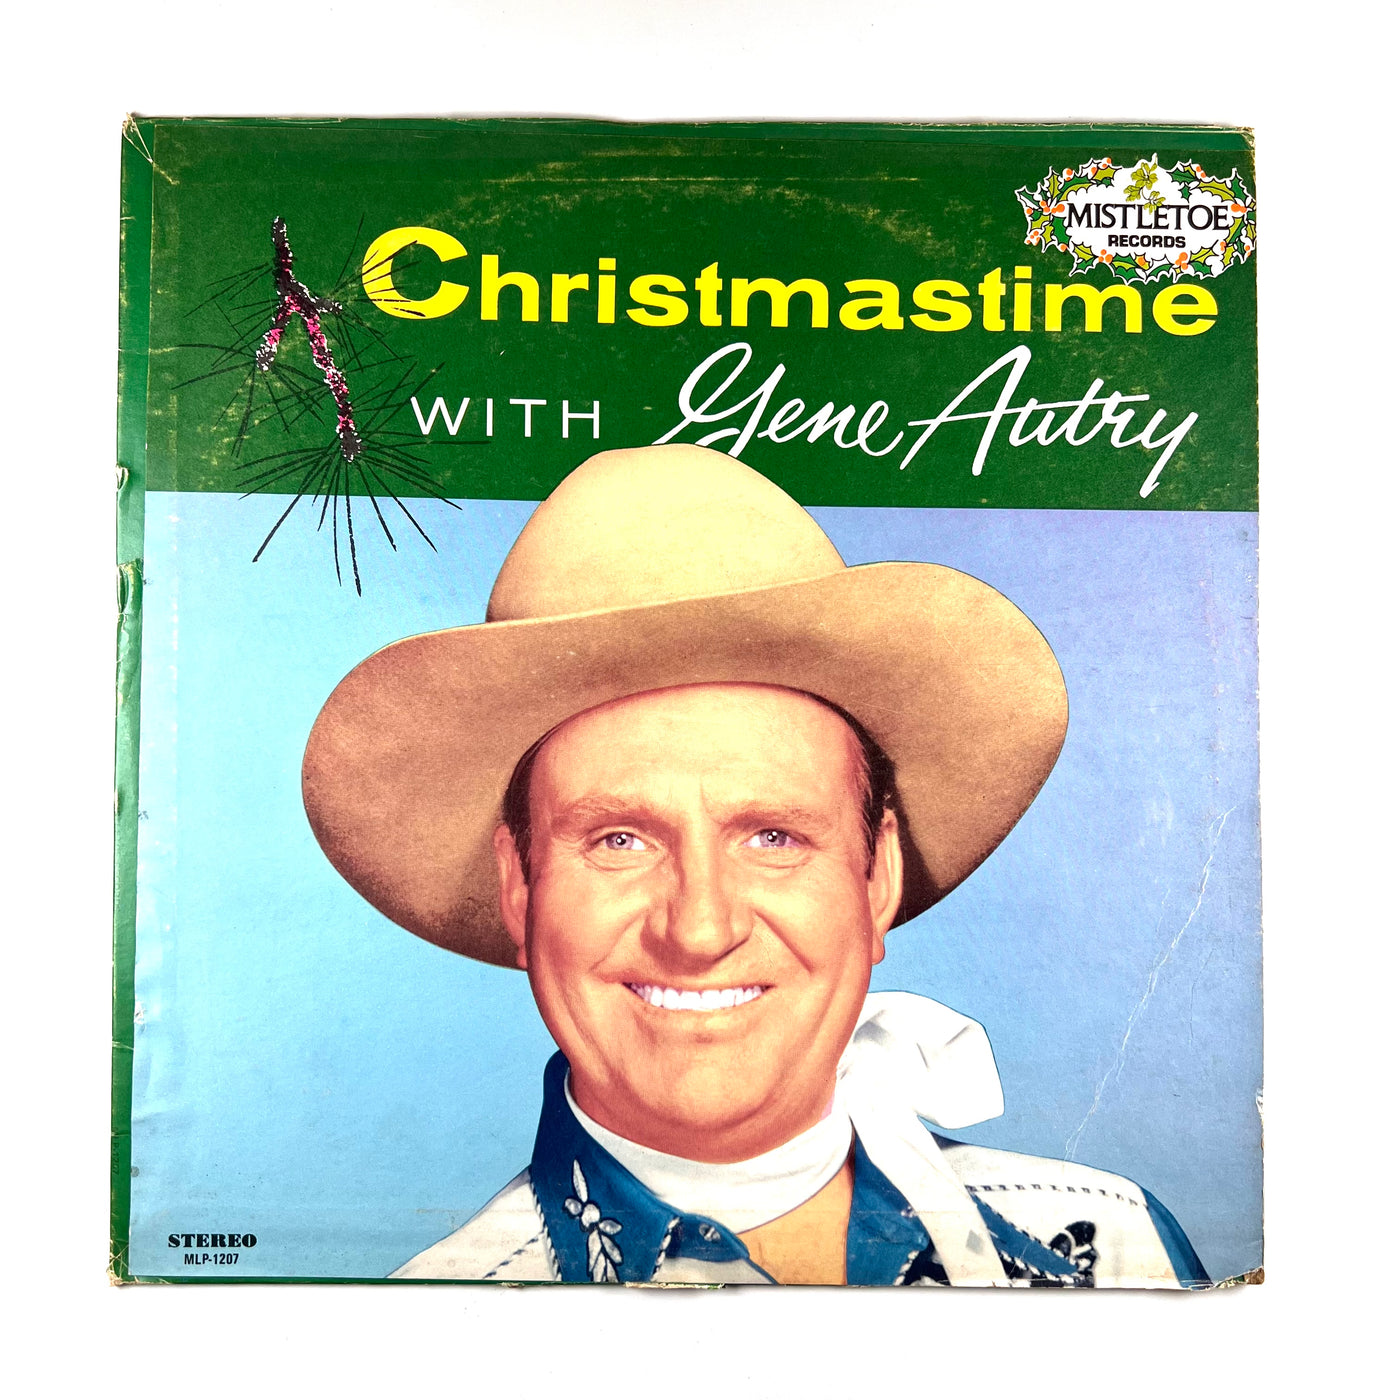 Gene Autry - Christmastime With Gene Autry